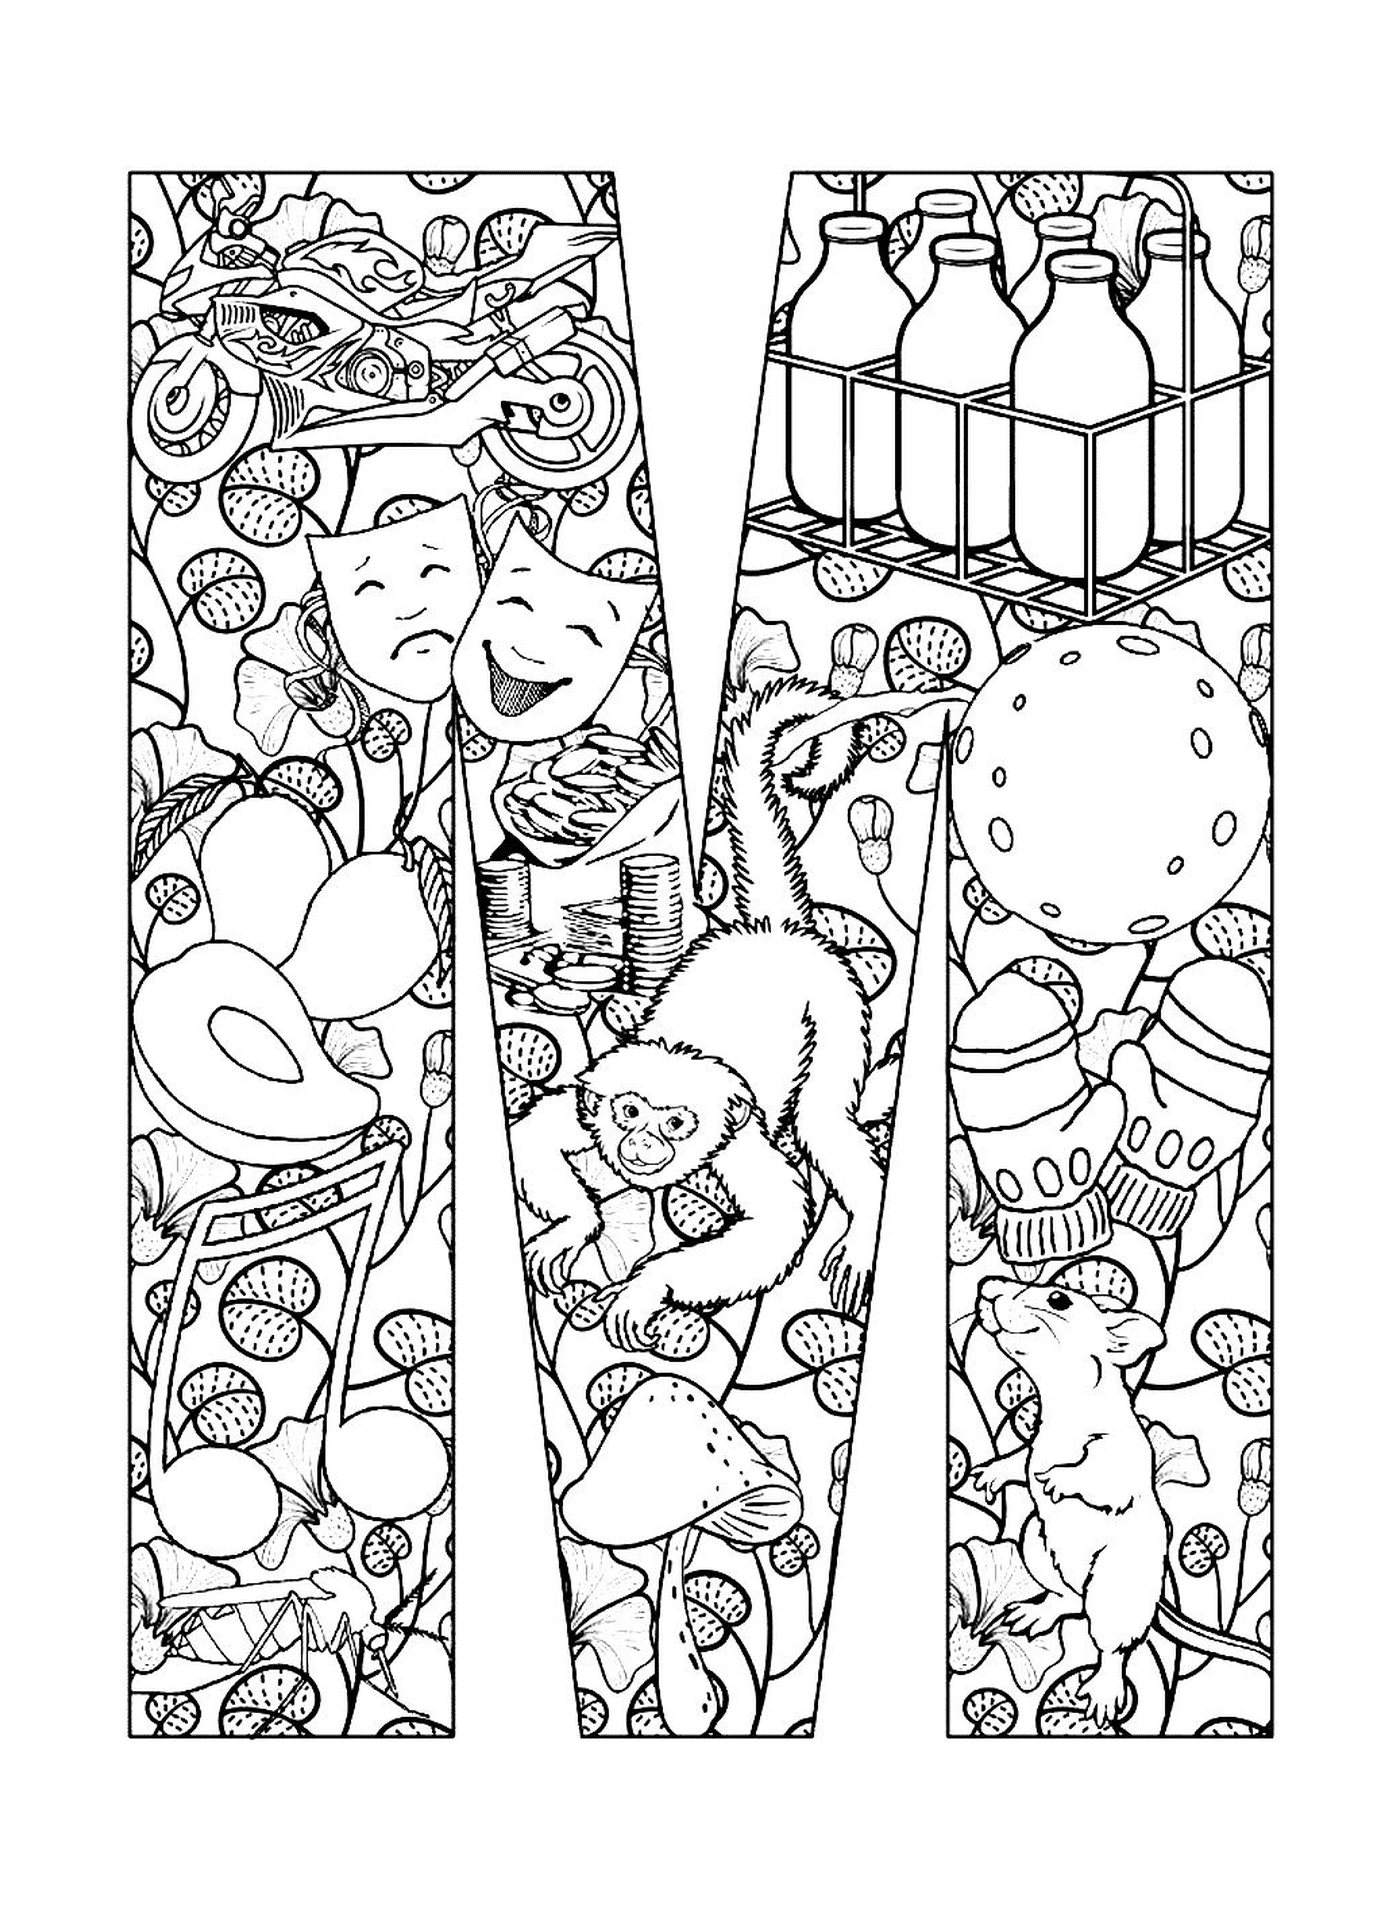  Adult coloring: monkey, cat and mouse 